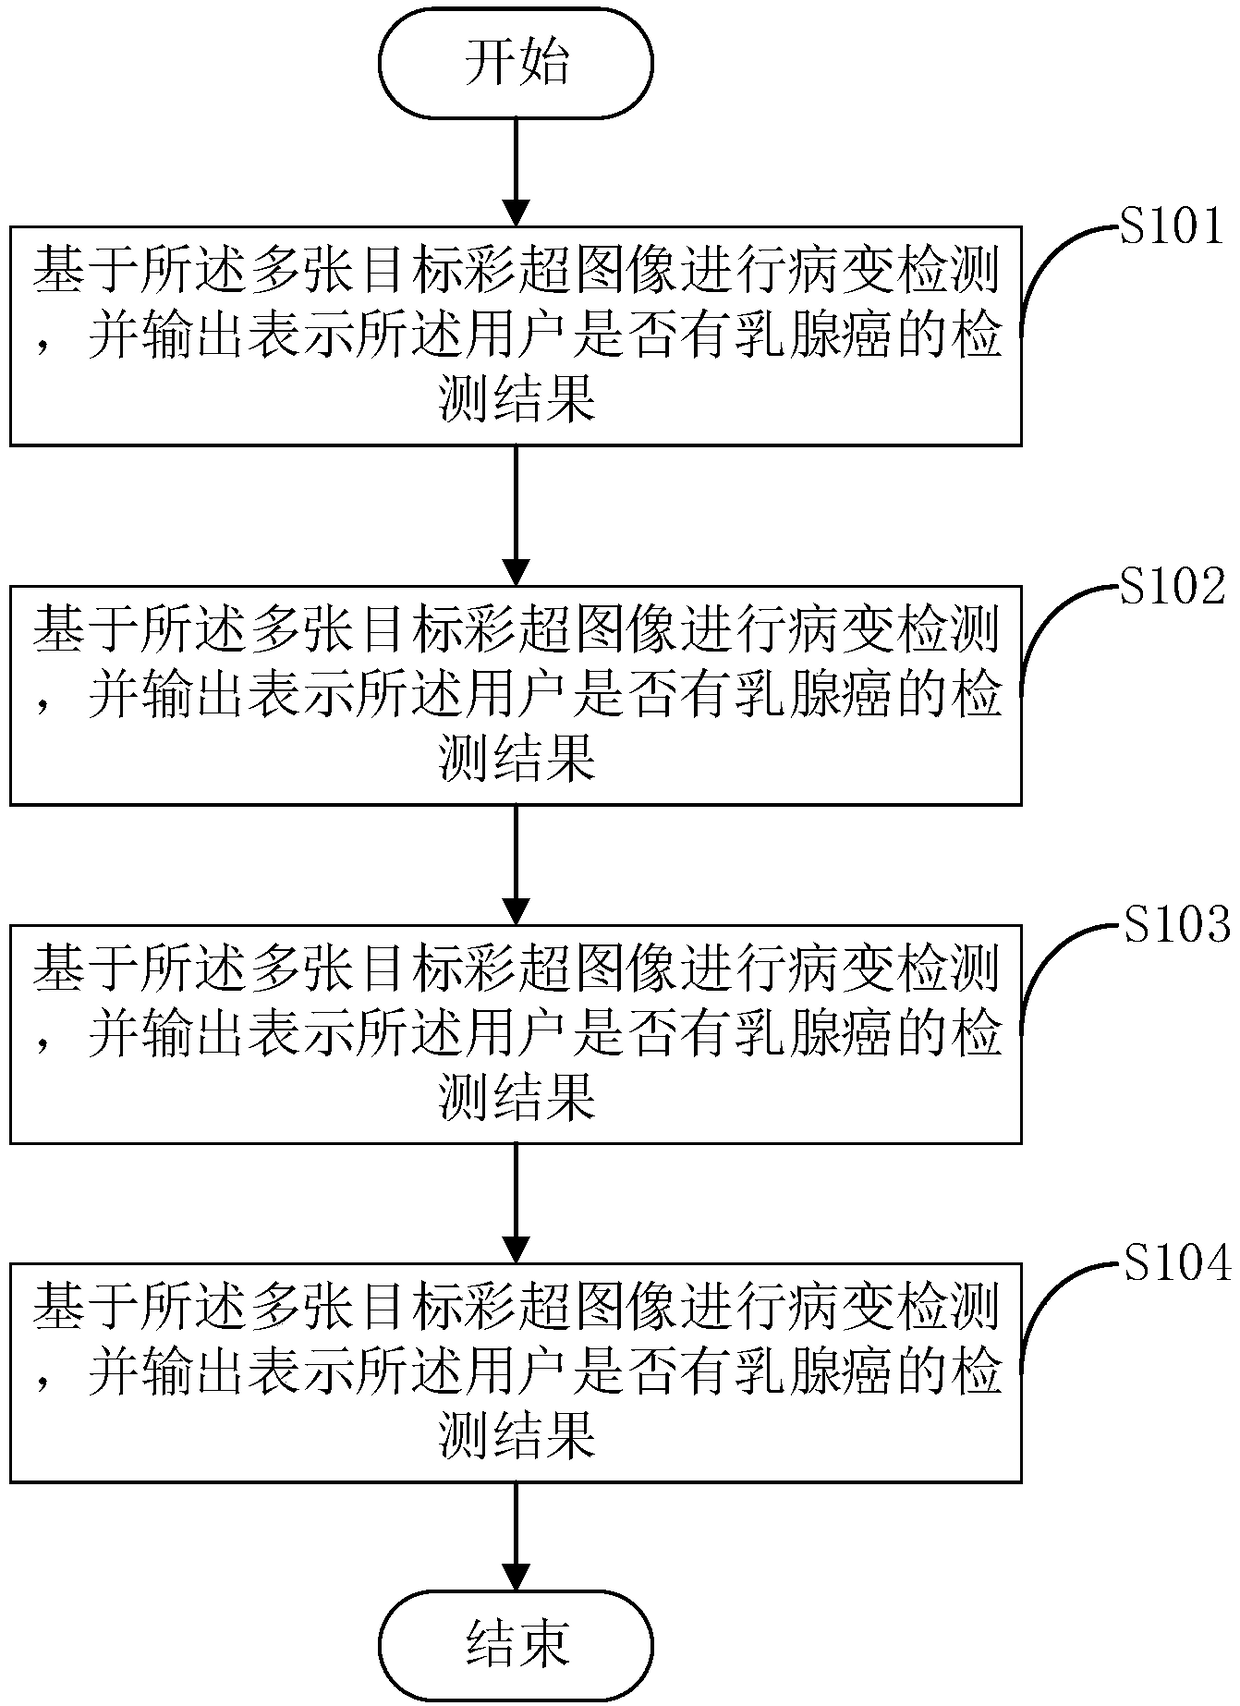 Breast cancer detection method and device